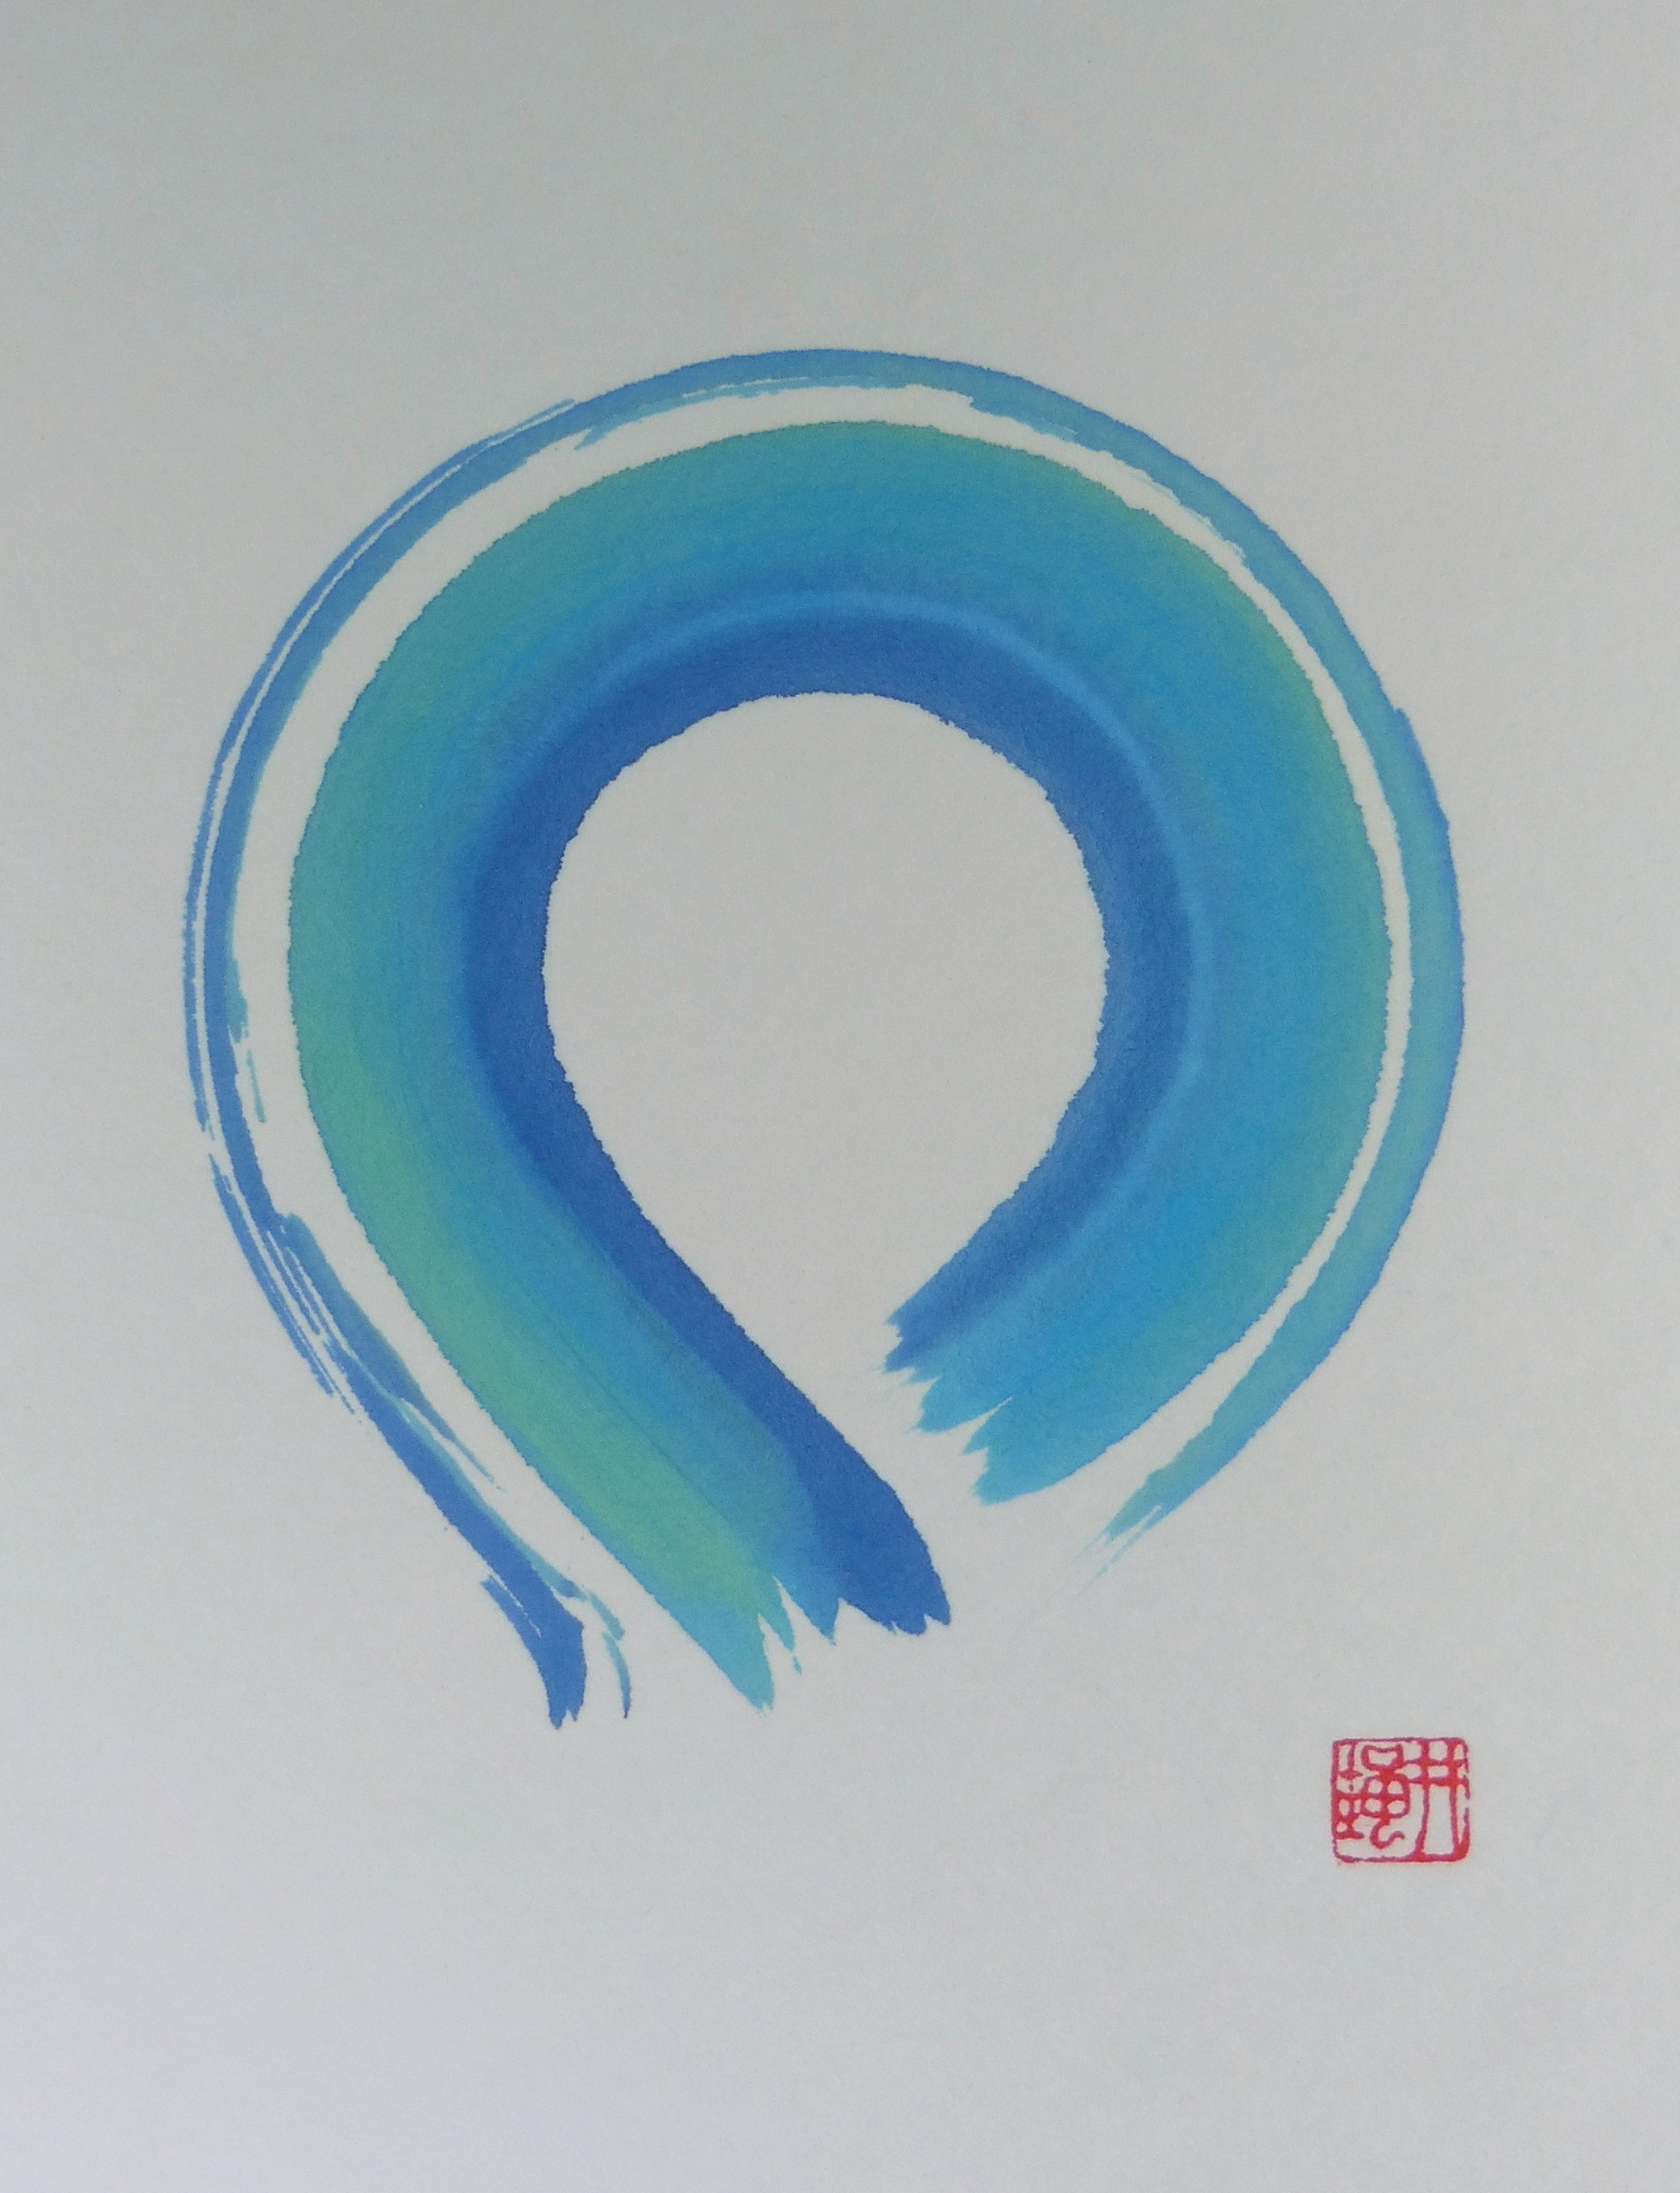 enso meaning